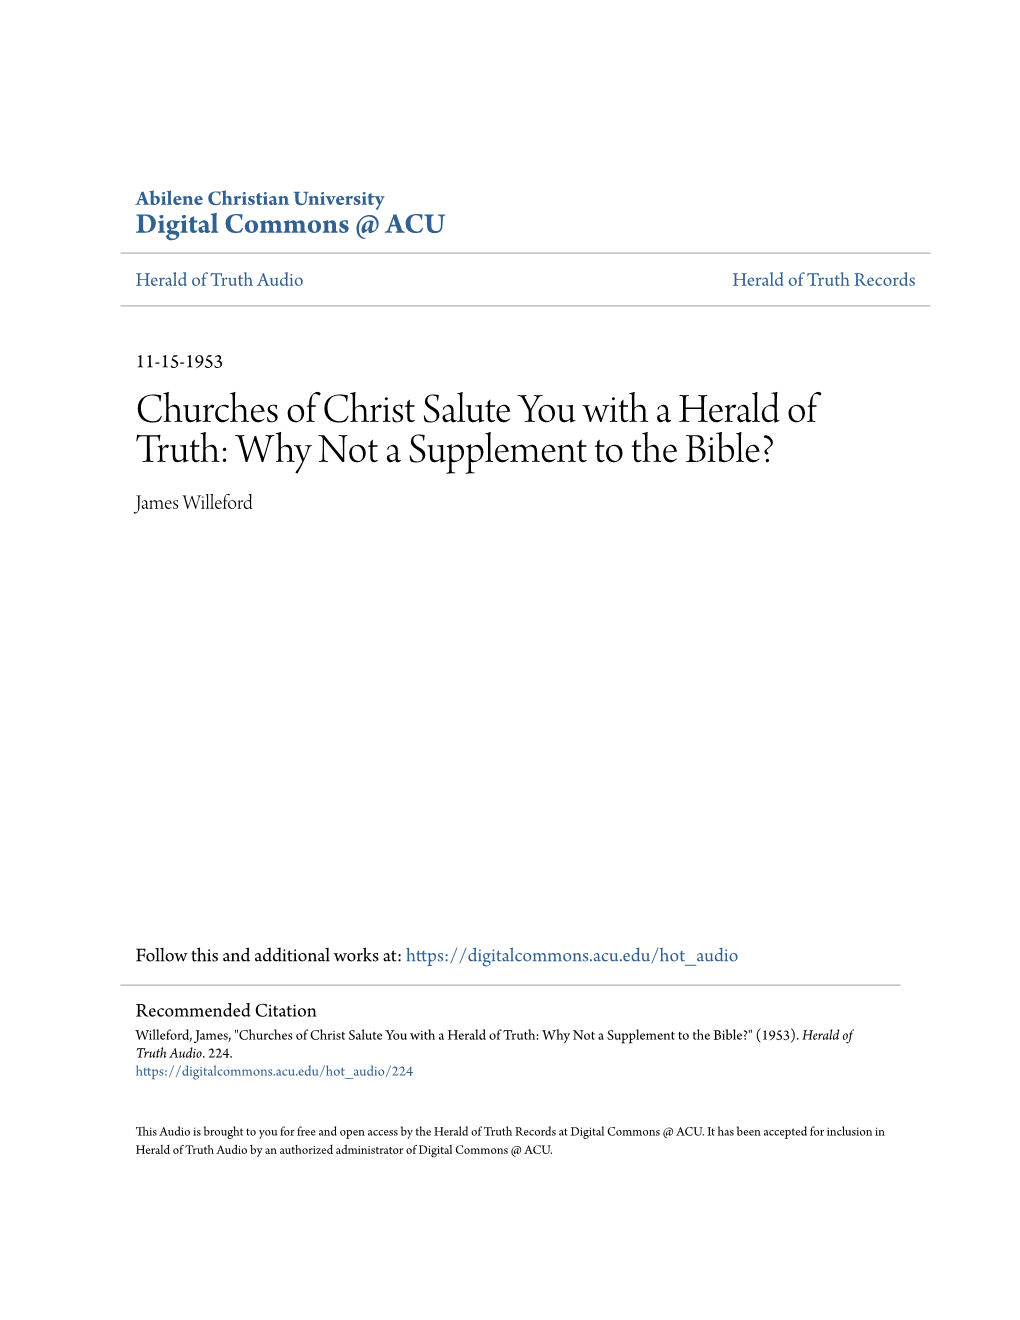 Churches of Christ Salute You with a Herald of Truth: Why Not a Supplement to the Bible? James Willeford